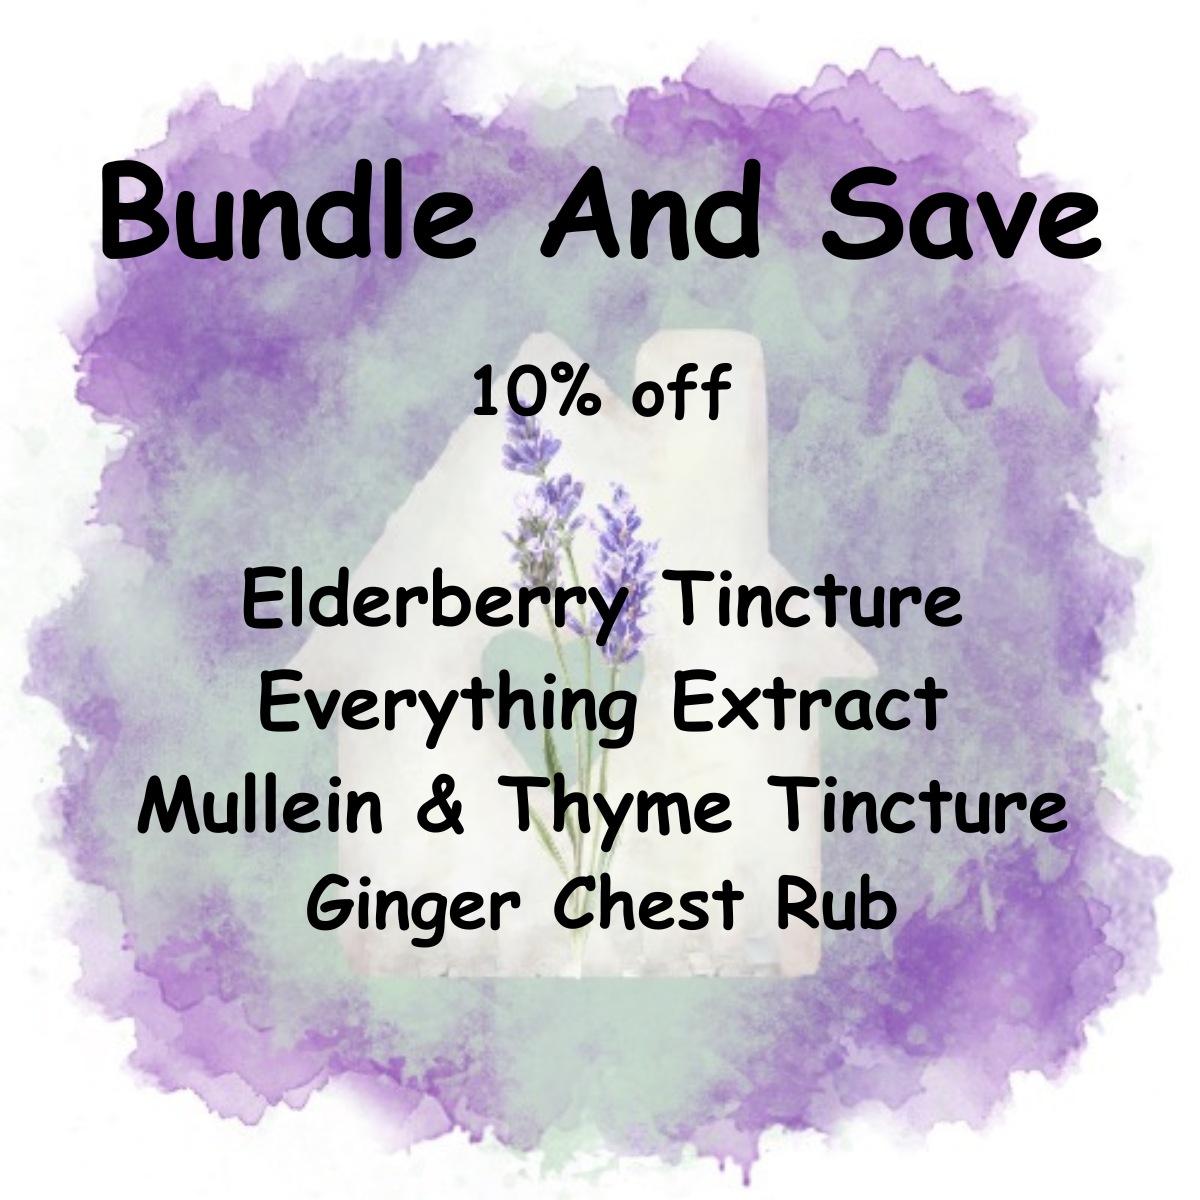 Bundle and Save | Winter Immune Support | Elderberry Tincture, Everything Extract, Mullein & Thyme Tincture, Ginger Chest Rub | Apothecary